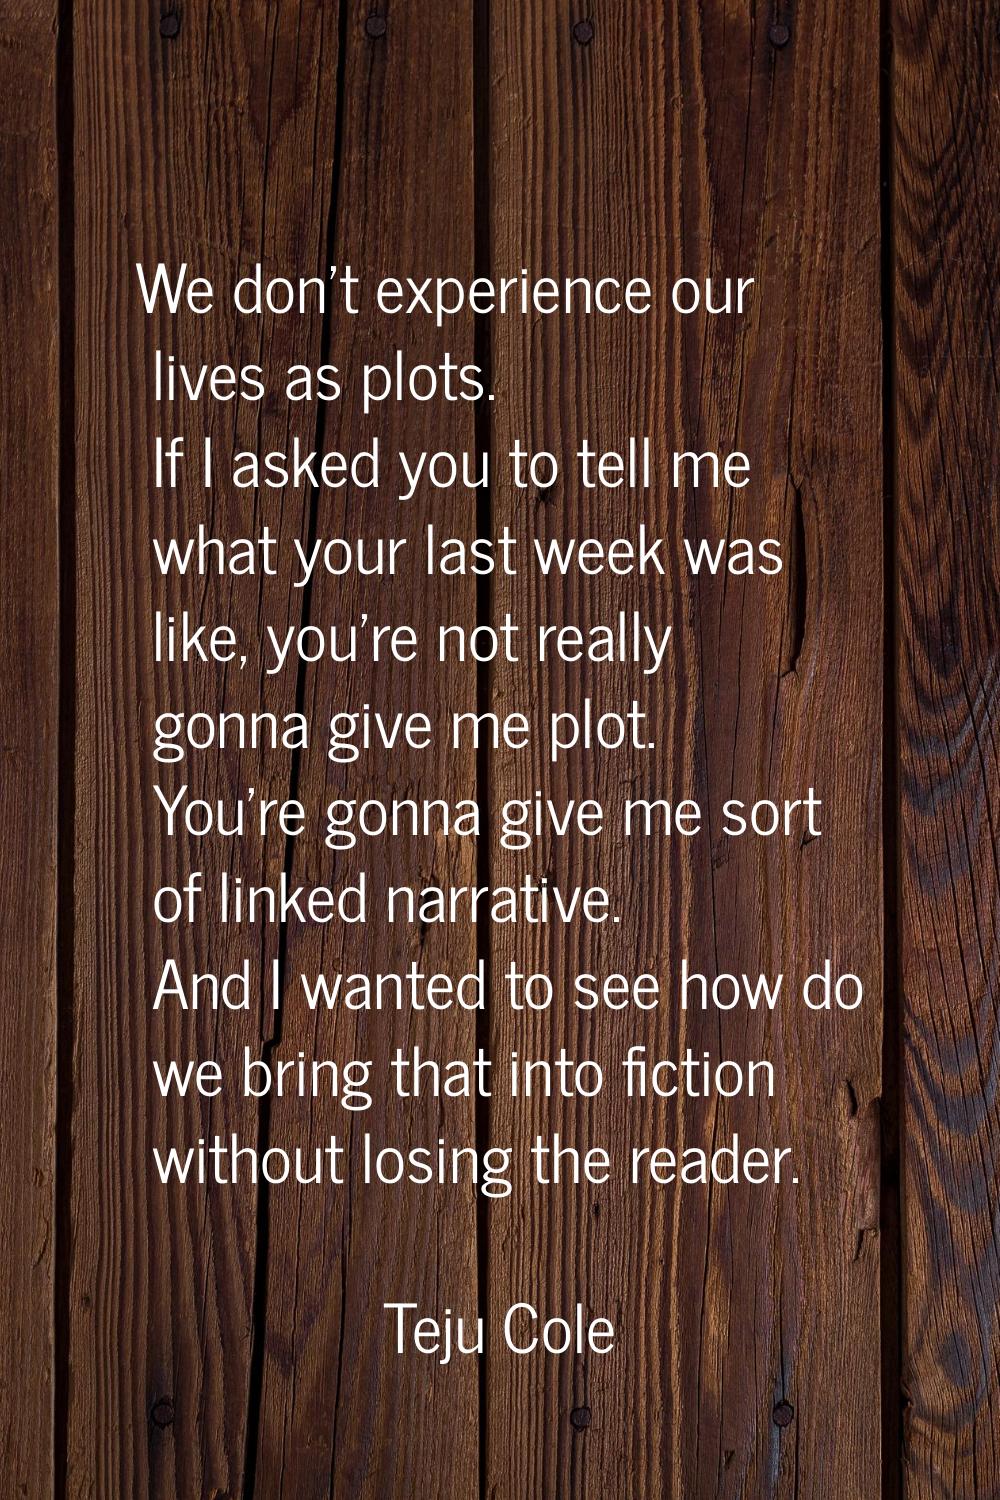 We don't experience our lives as plots. If I asked you to tell me what your last week was like, you